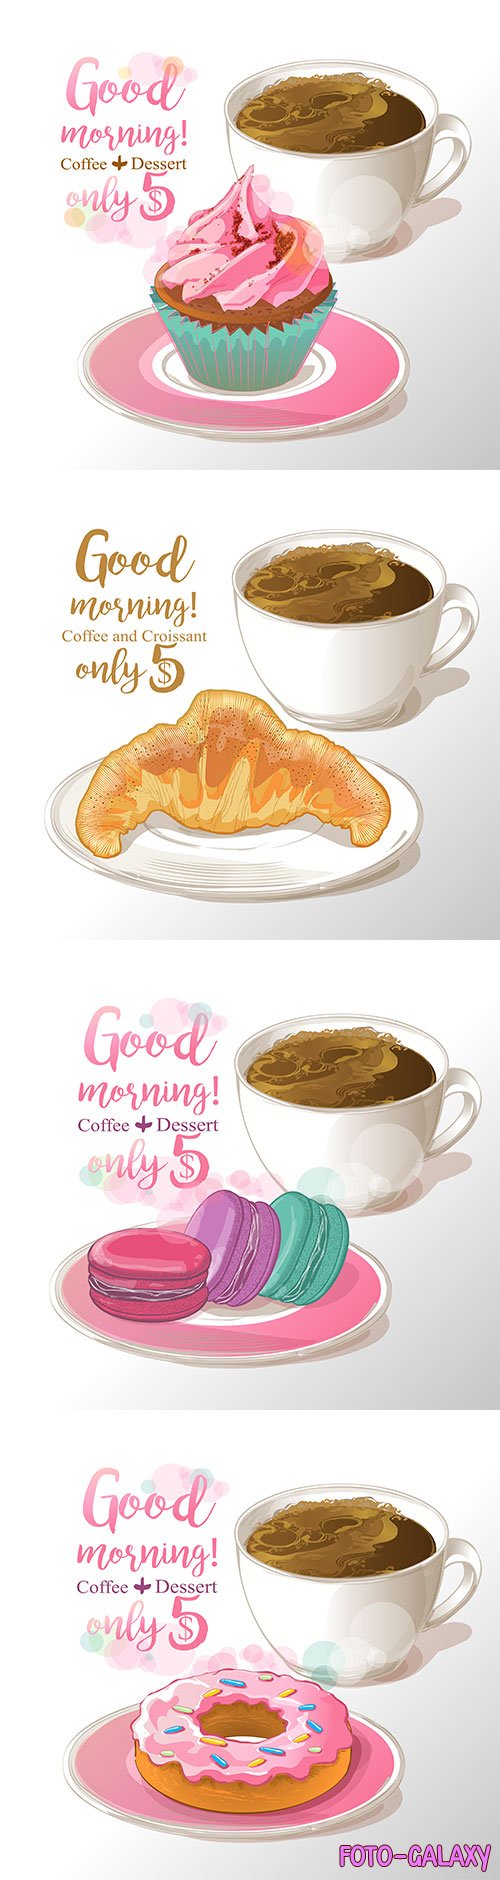 Cup of coffee with donut in vector